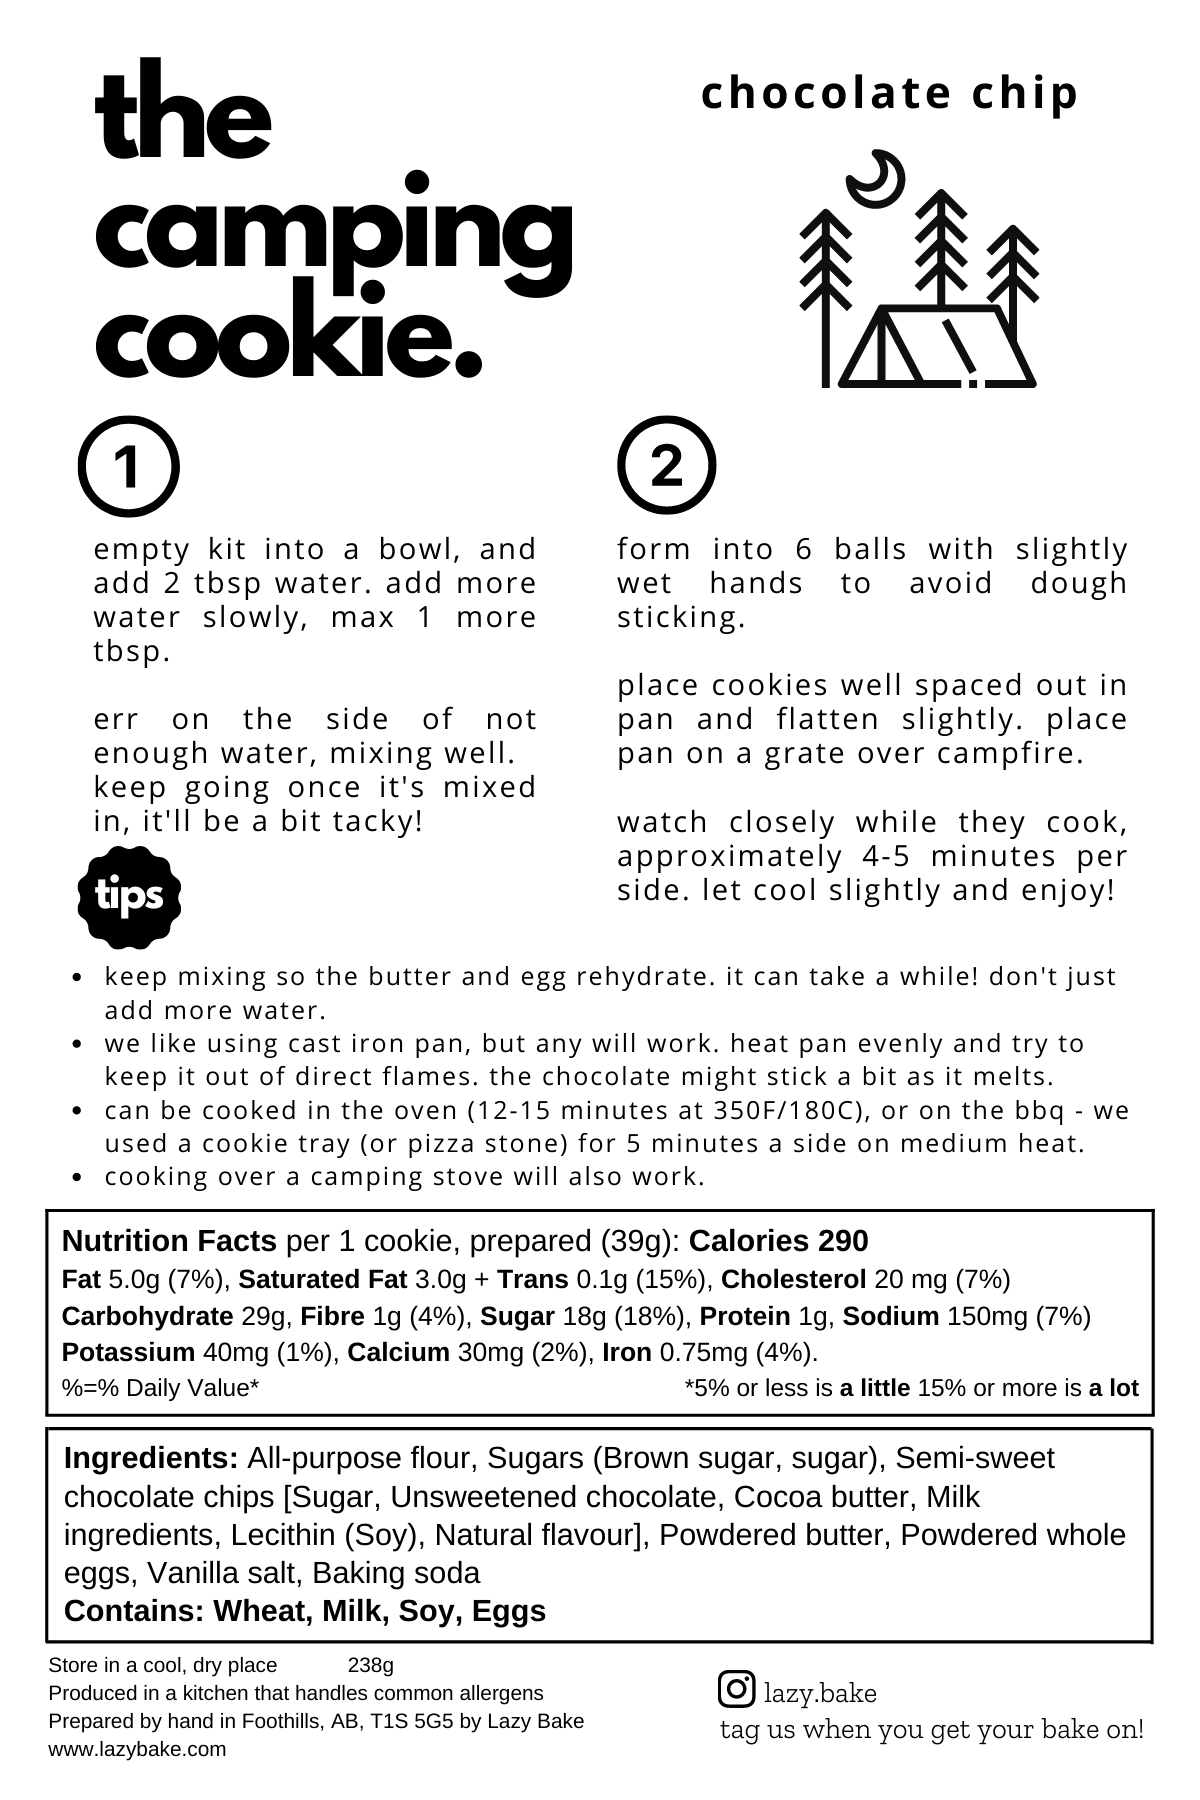 Camping Cookie - Chocolate Chip - Lazy Bake